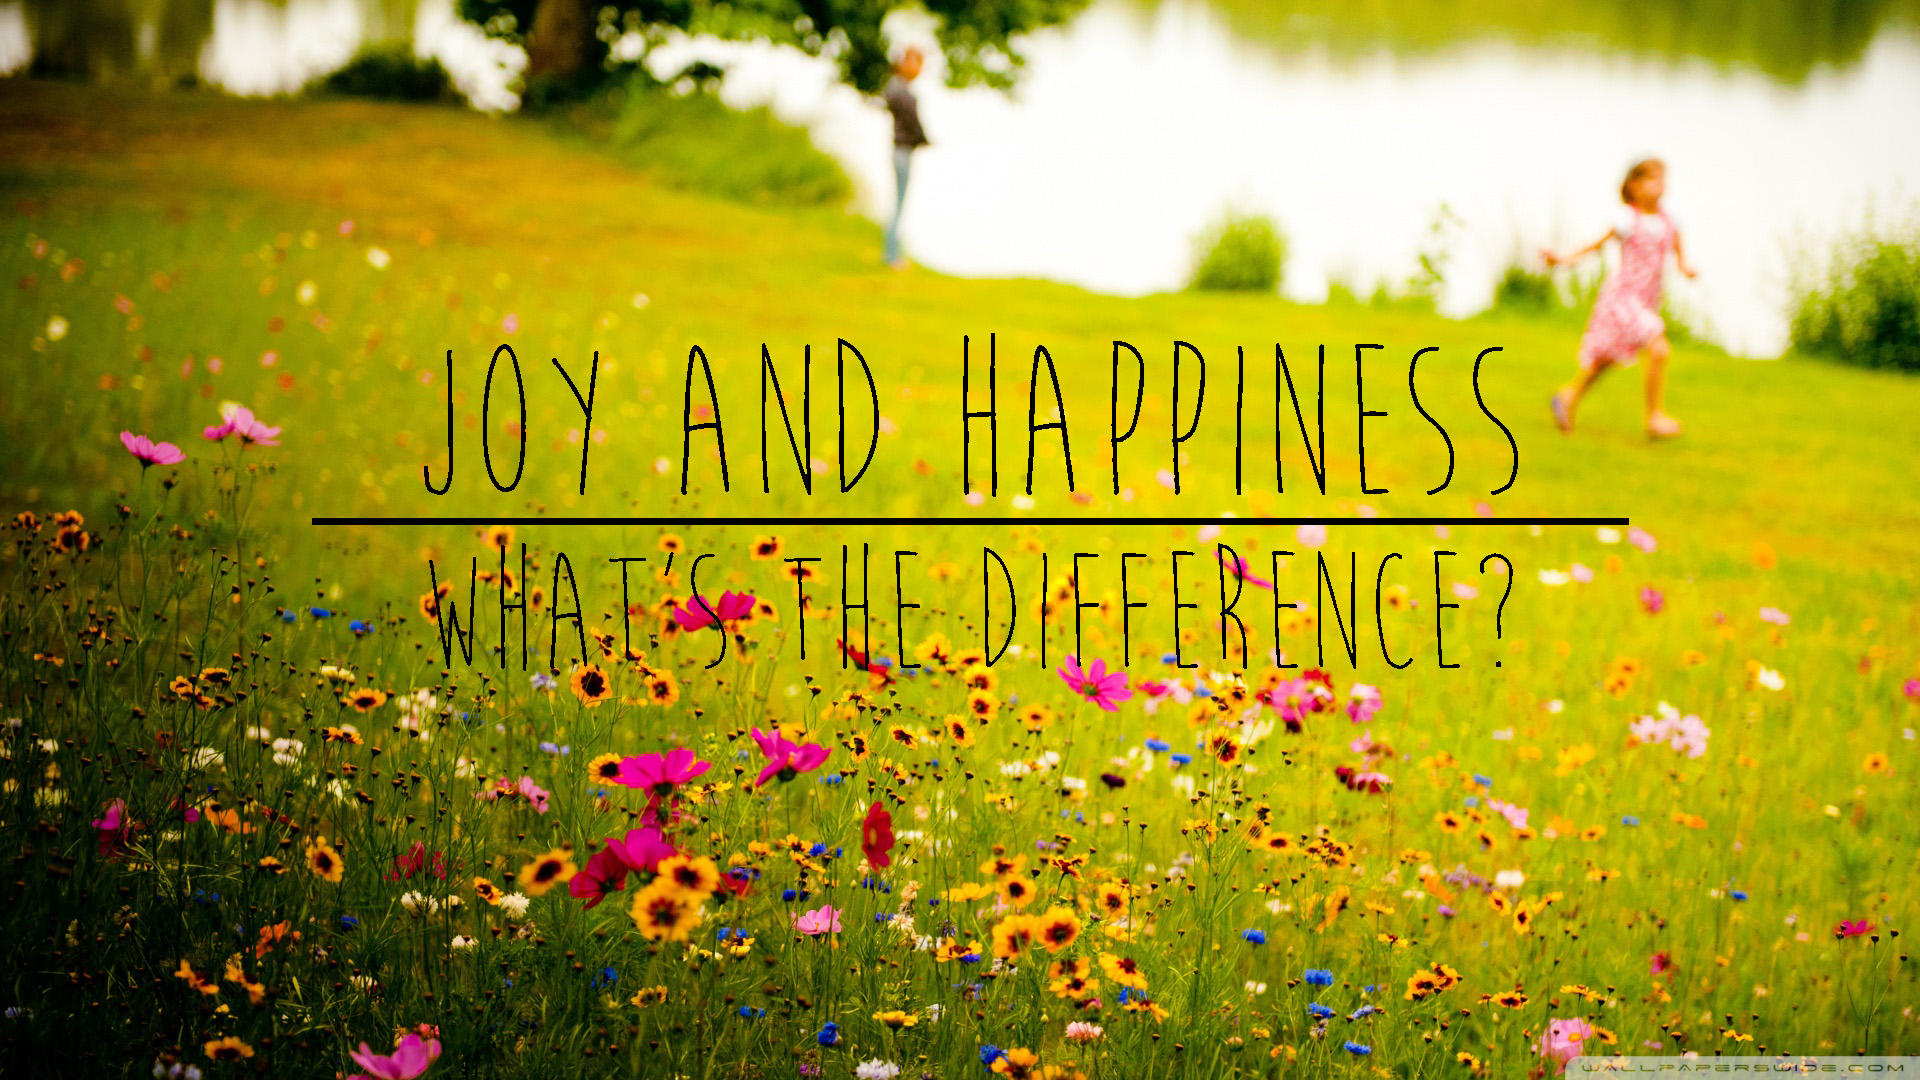 RE: Difference Between Joy and Happiness – david bartosik